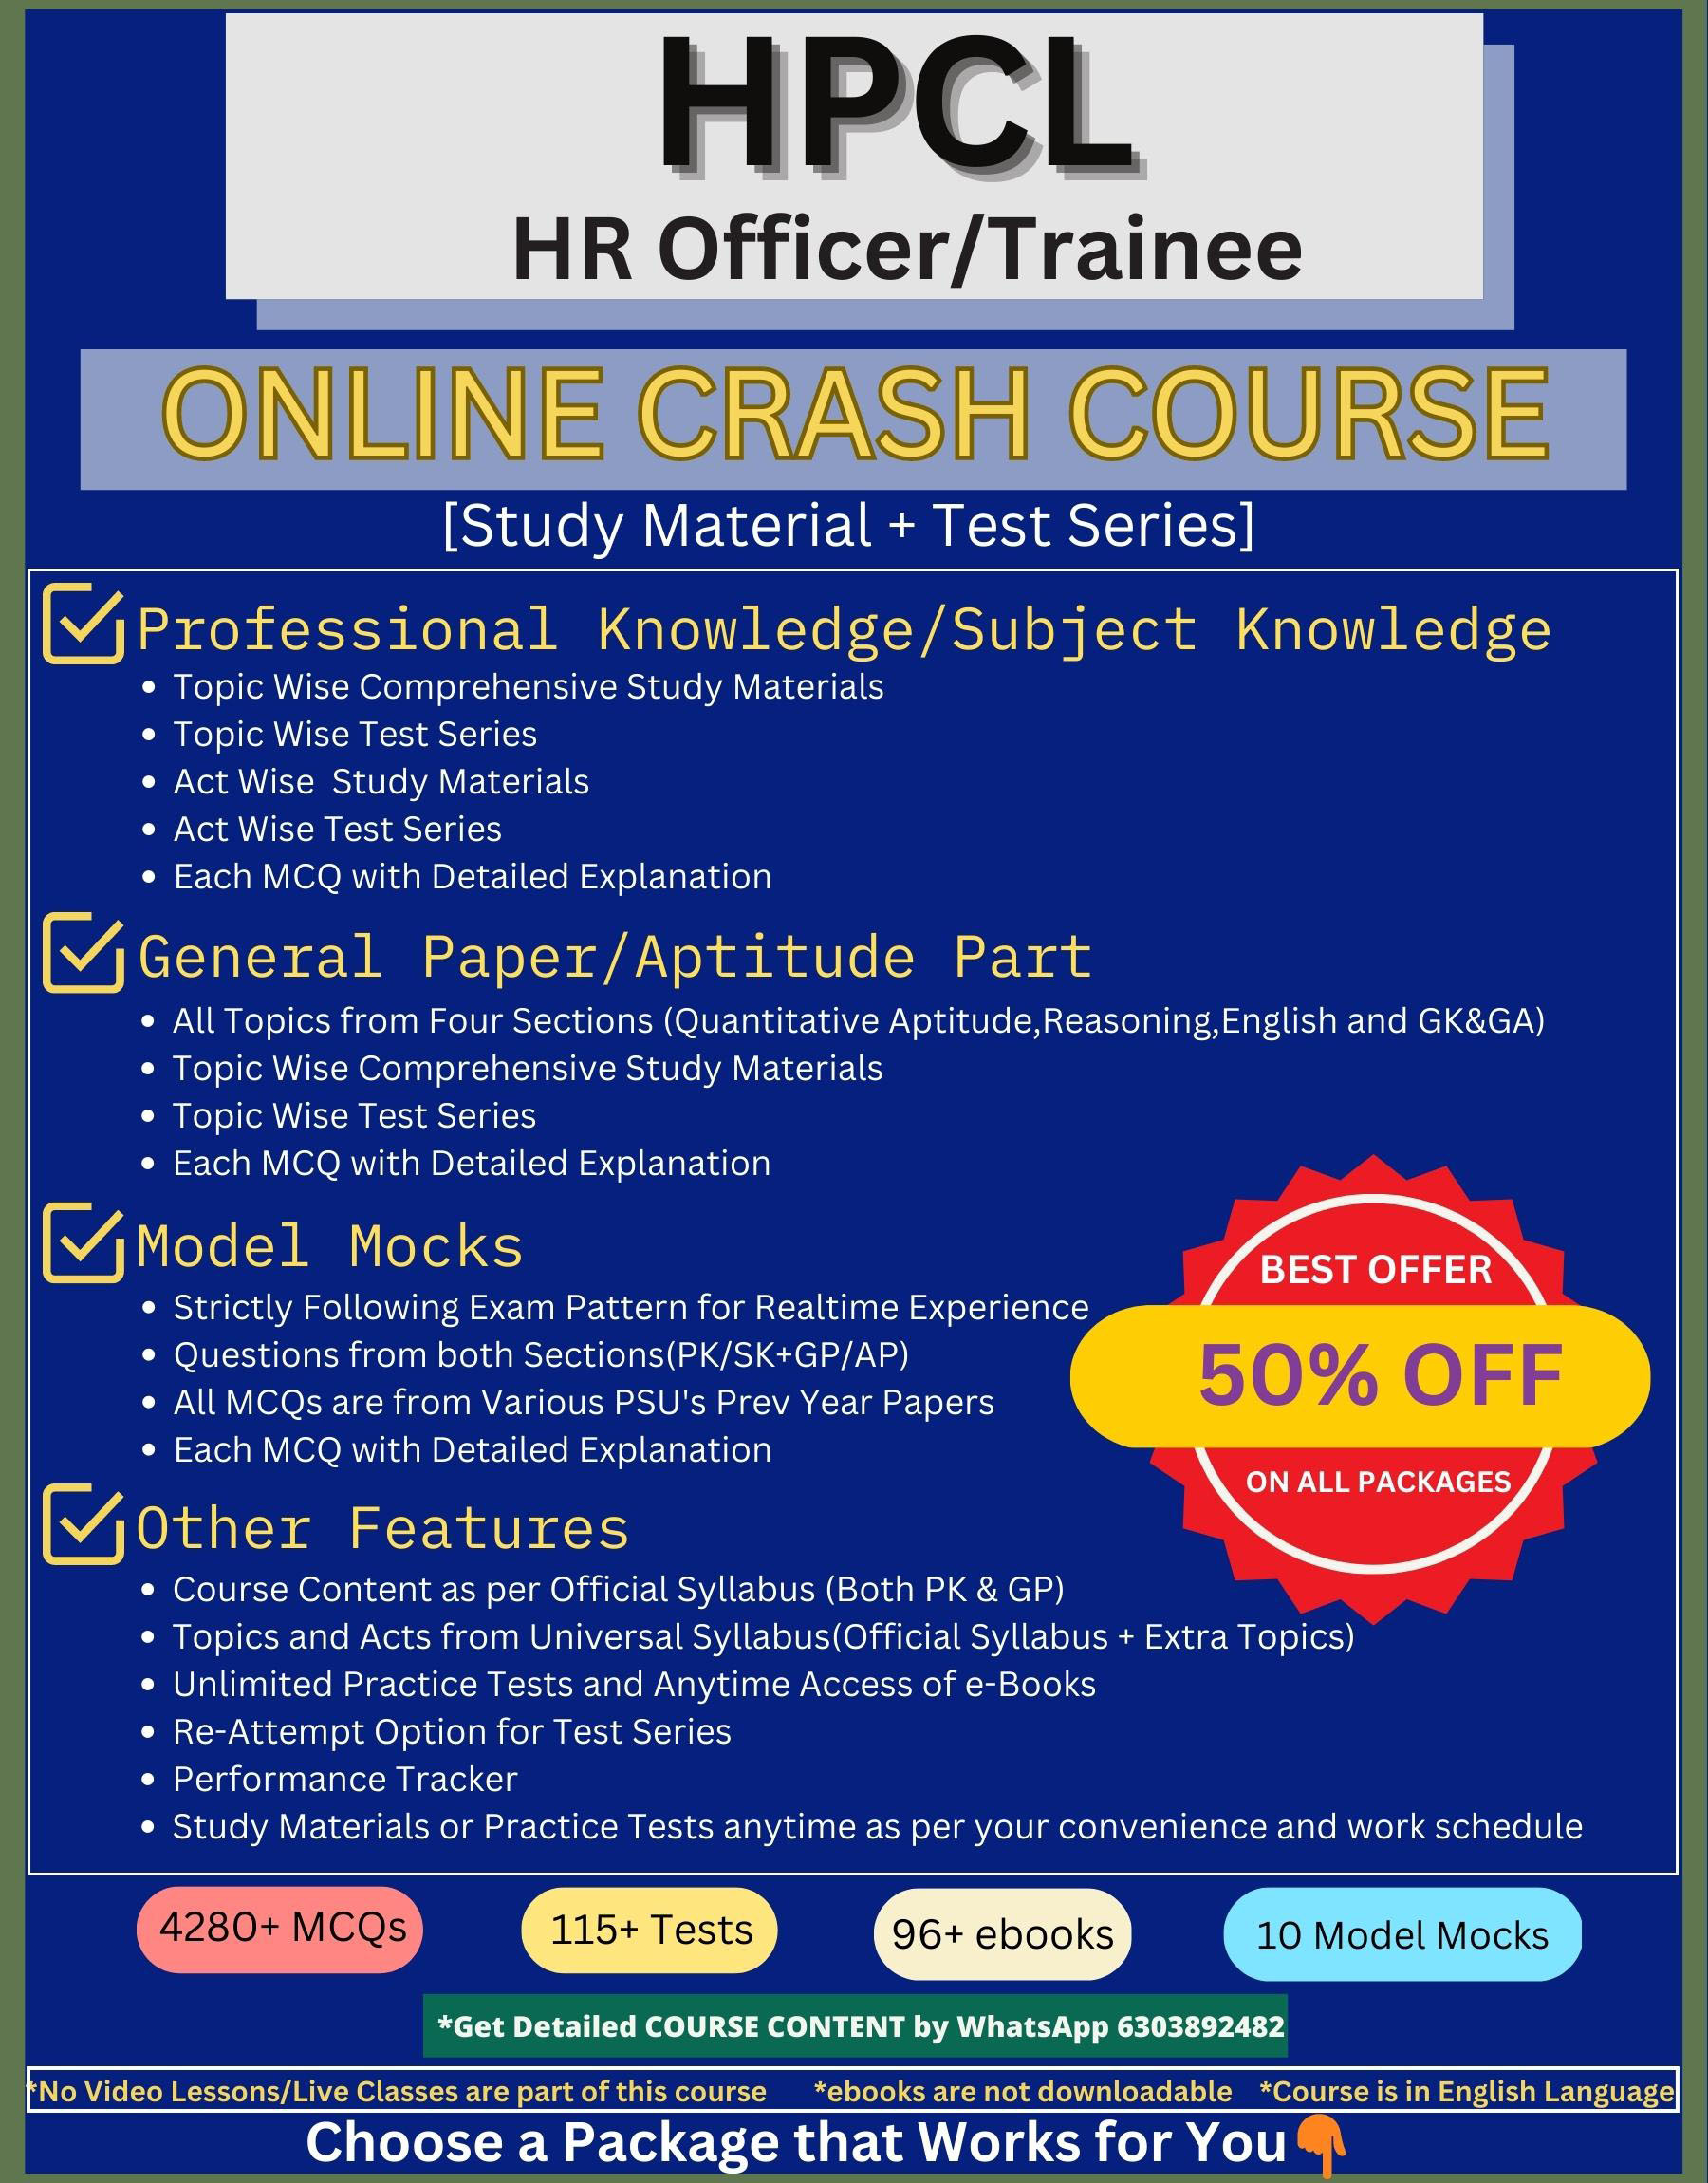 Online course with test series and study materials for Hindustan Petroleum Corporation HPCL HR Officer